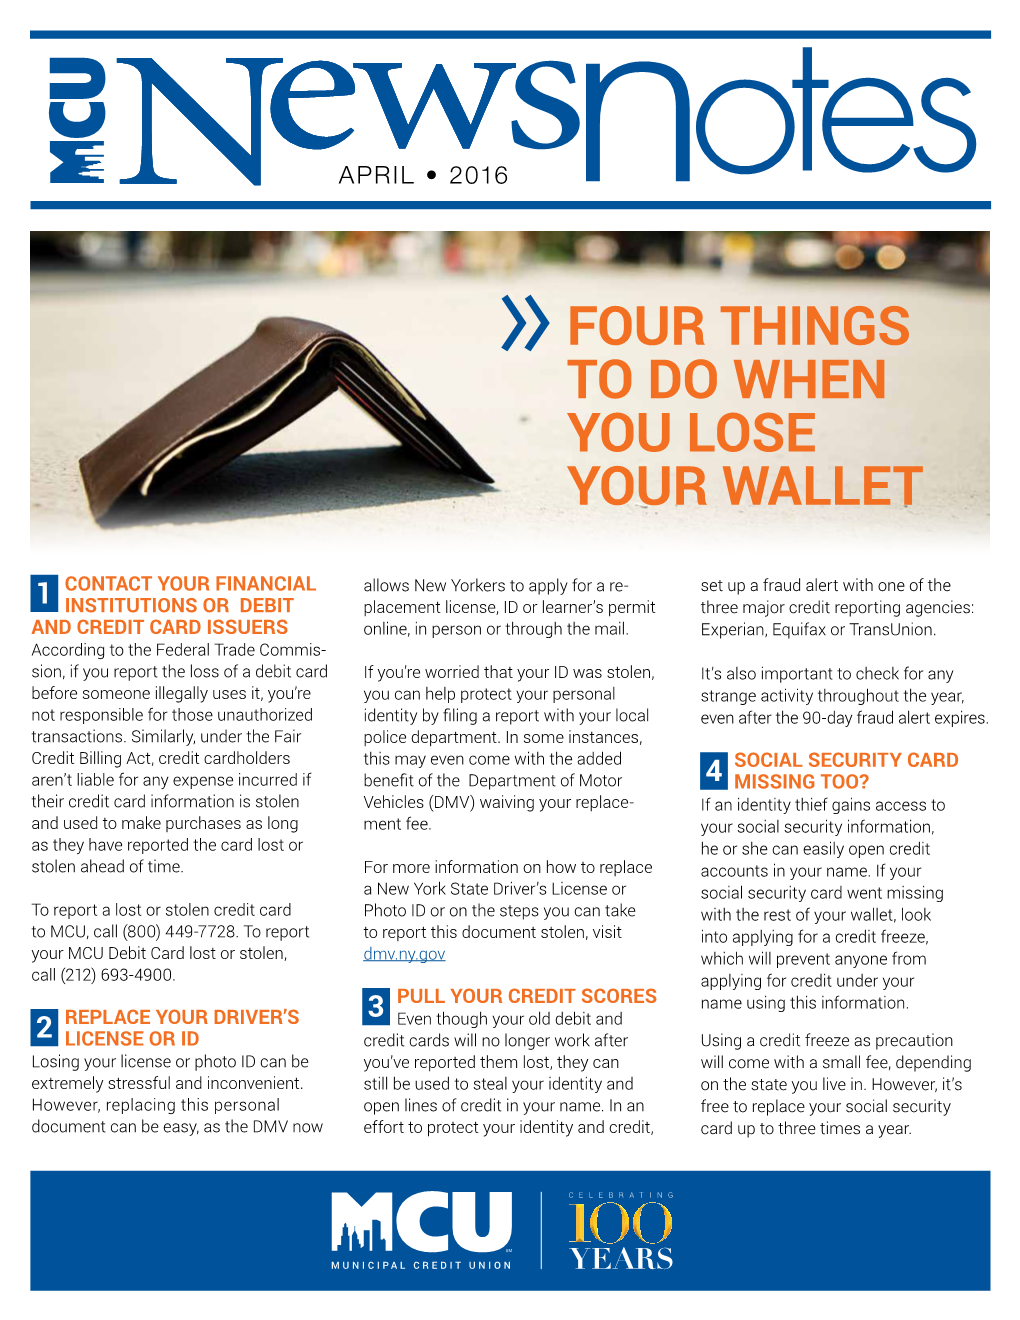 Four Things to Do When You Lose Your Wallet